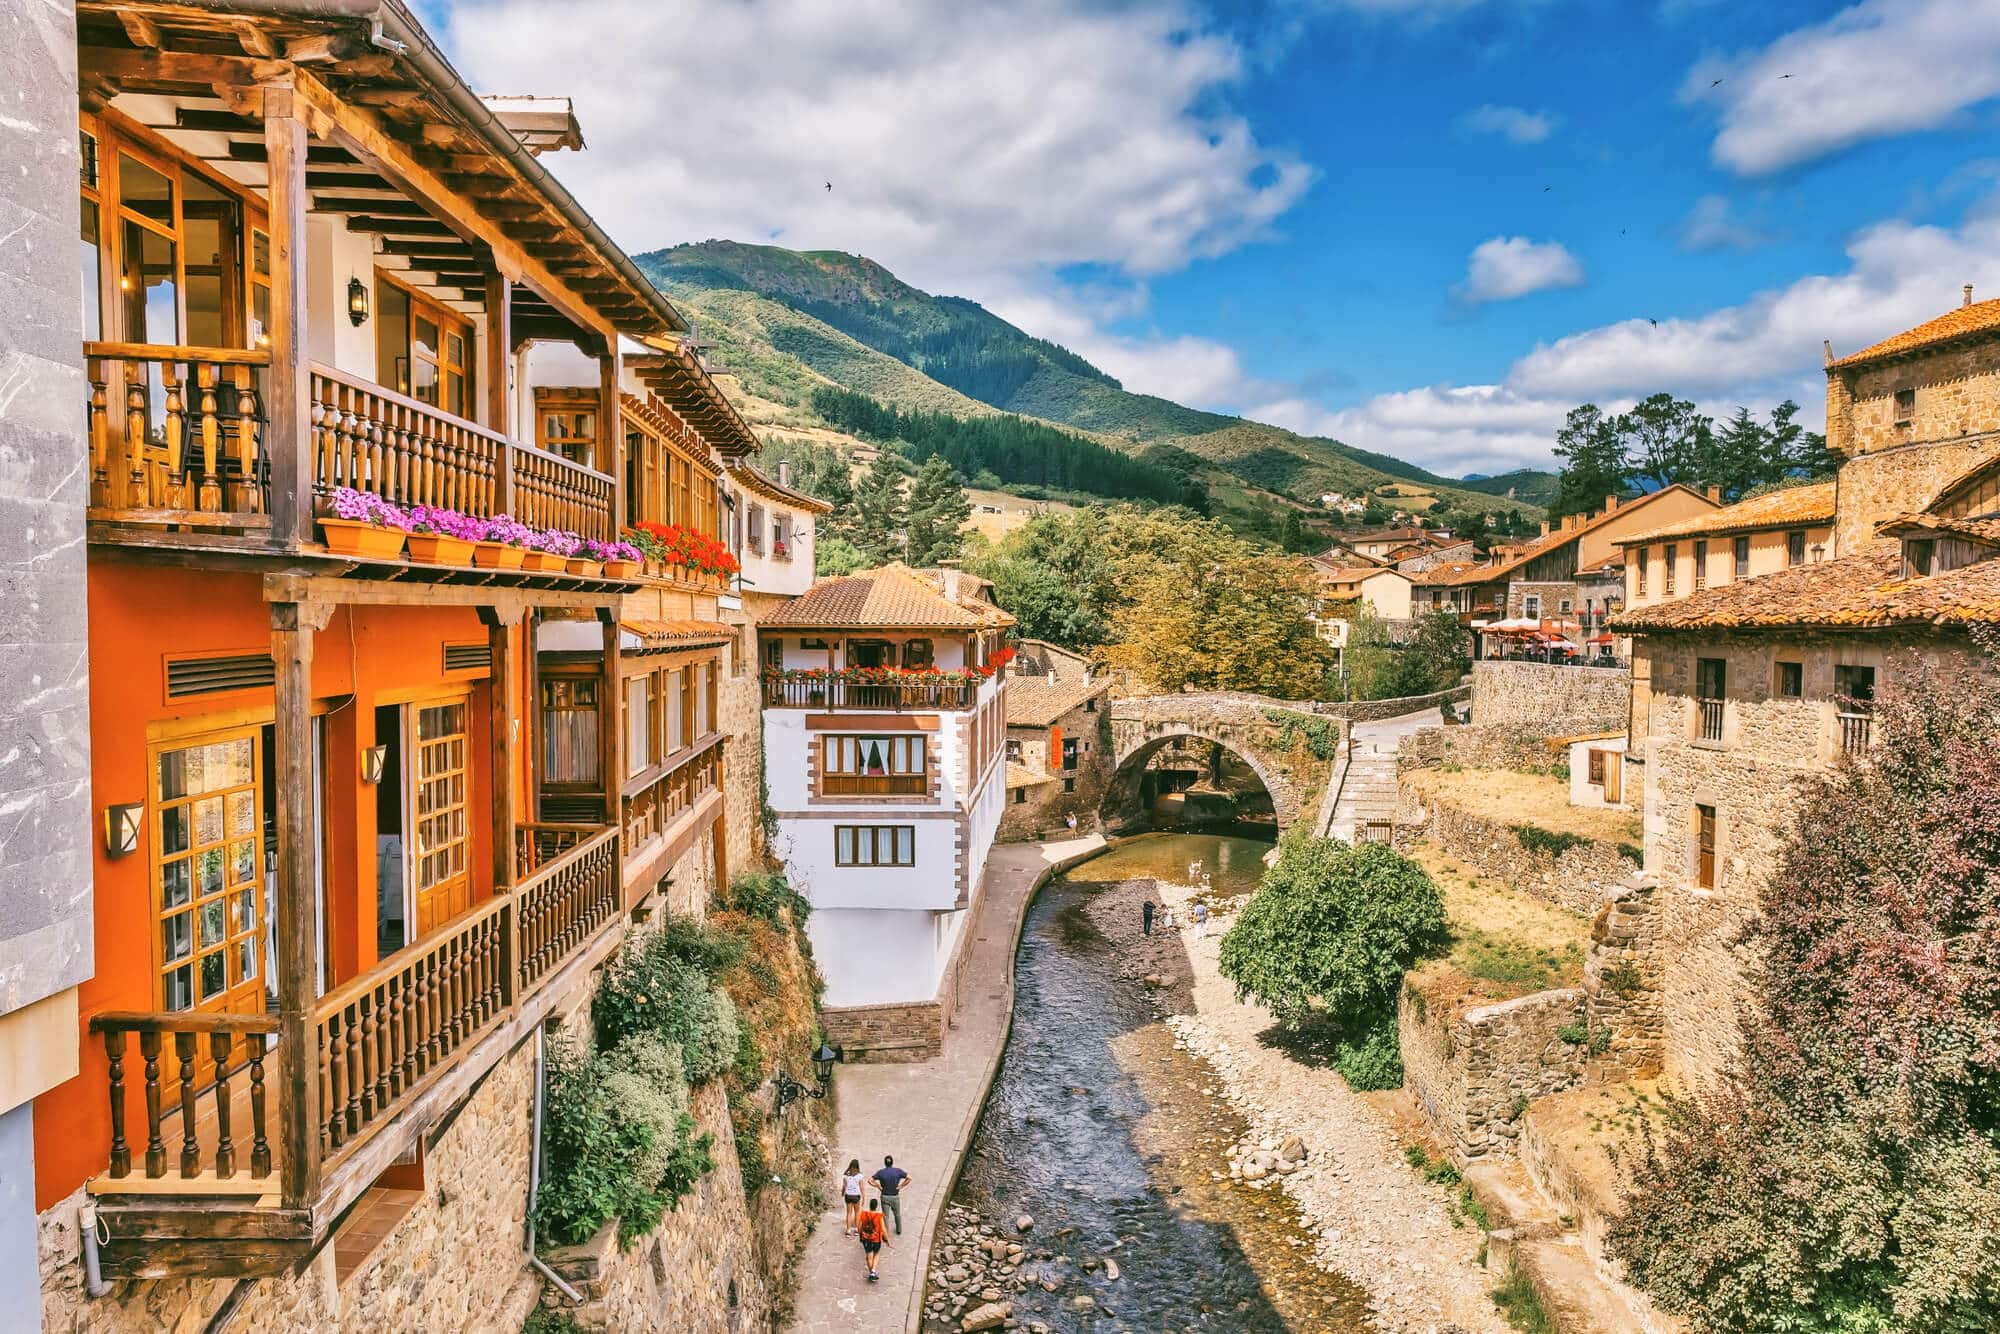 Potes - One of the most charming villages and a hidden gem in Spain